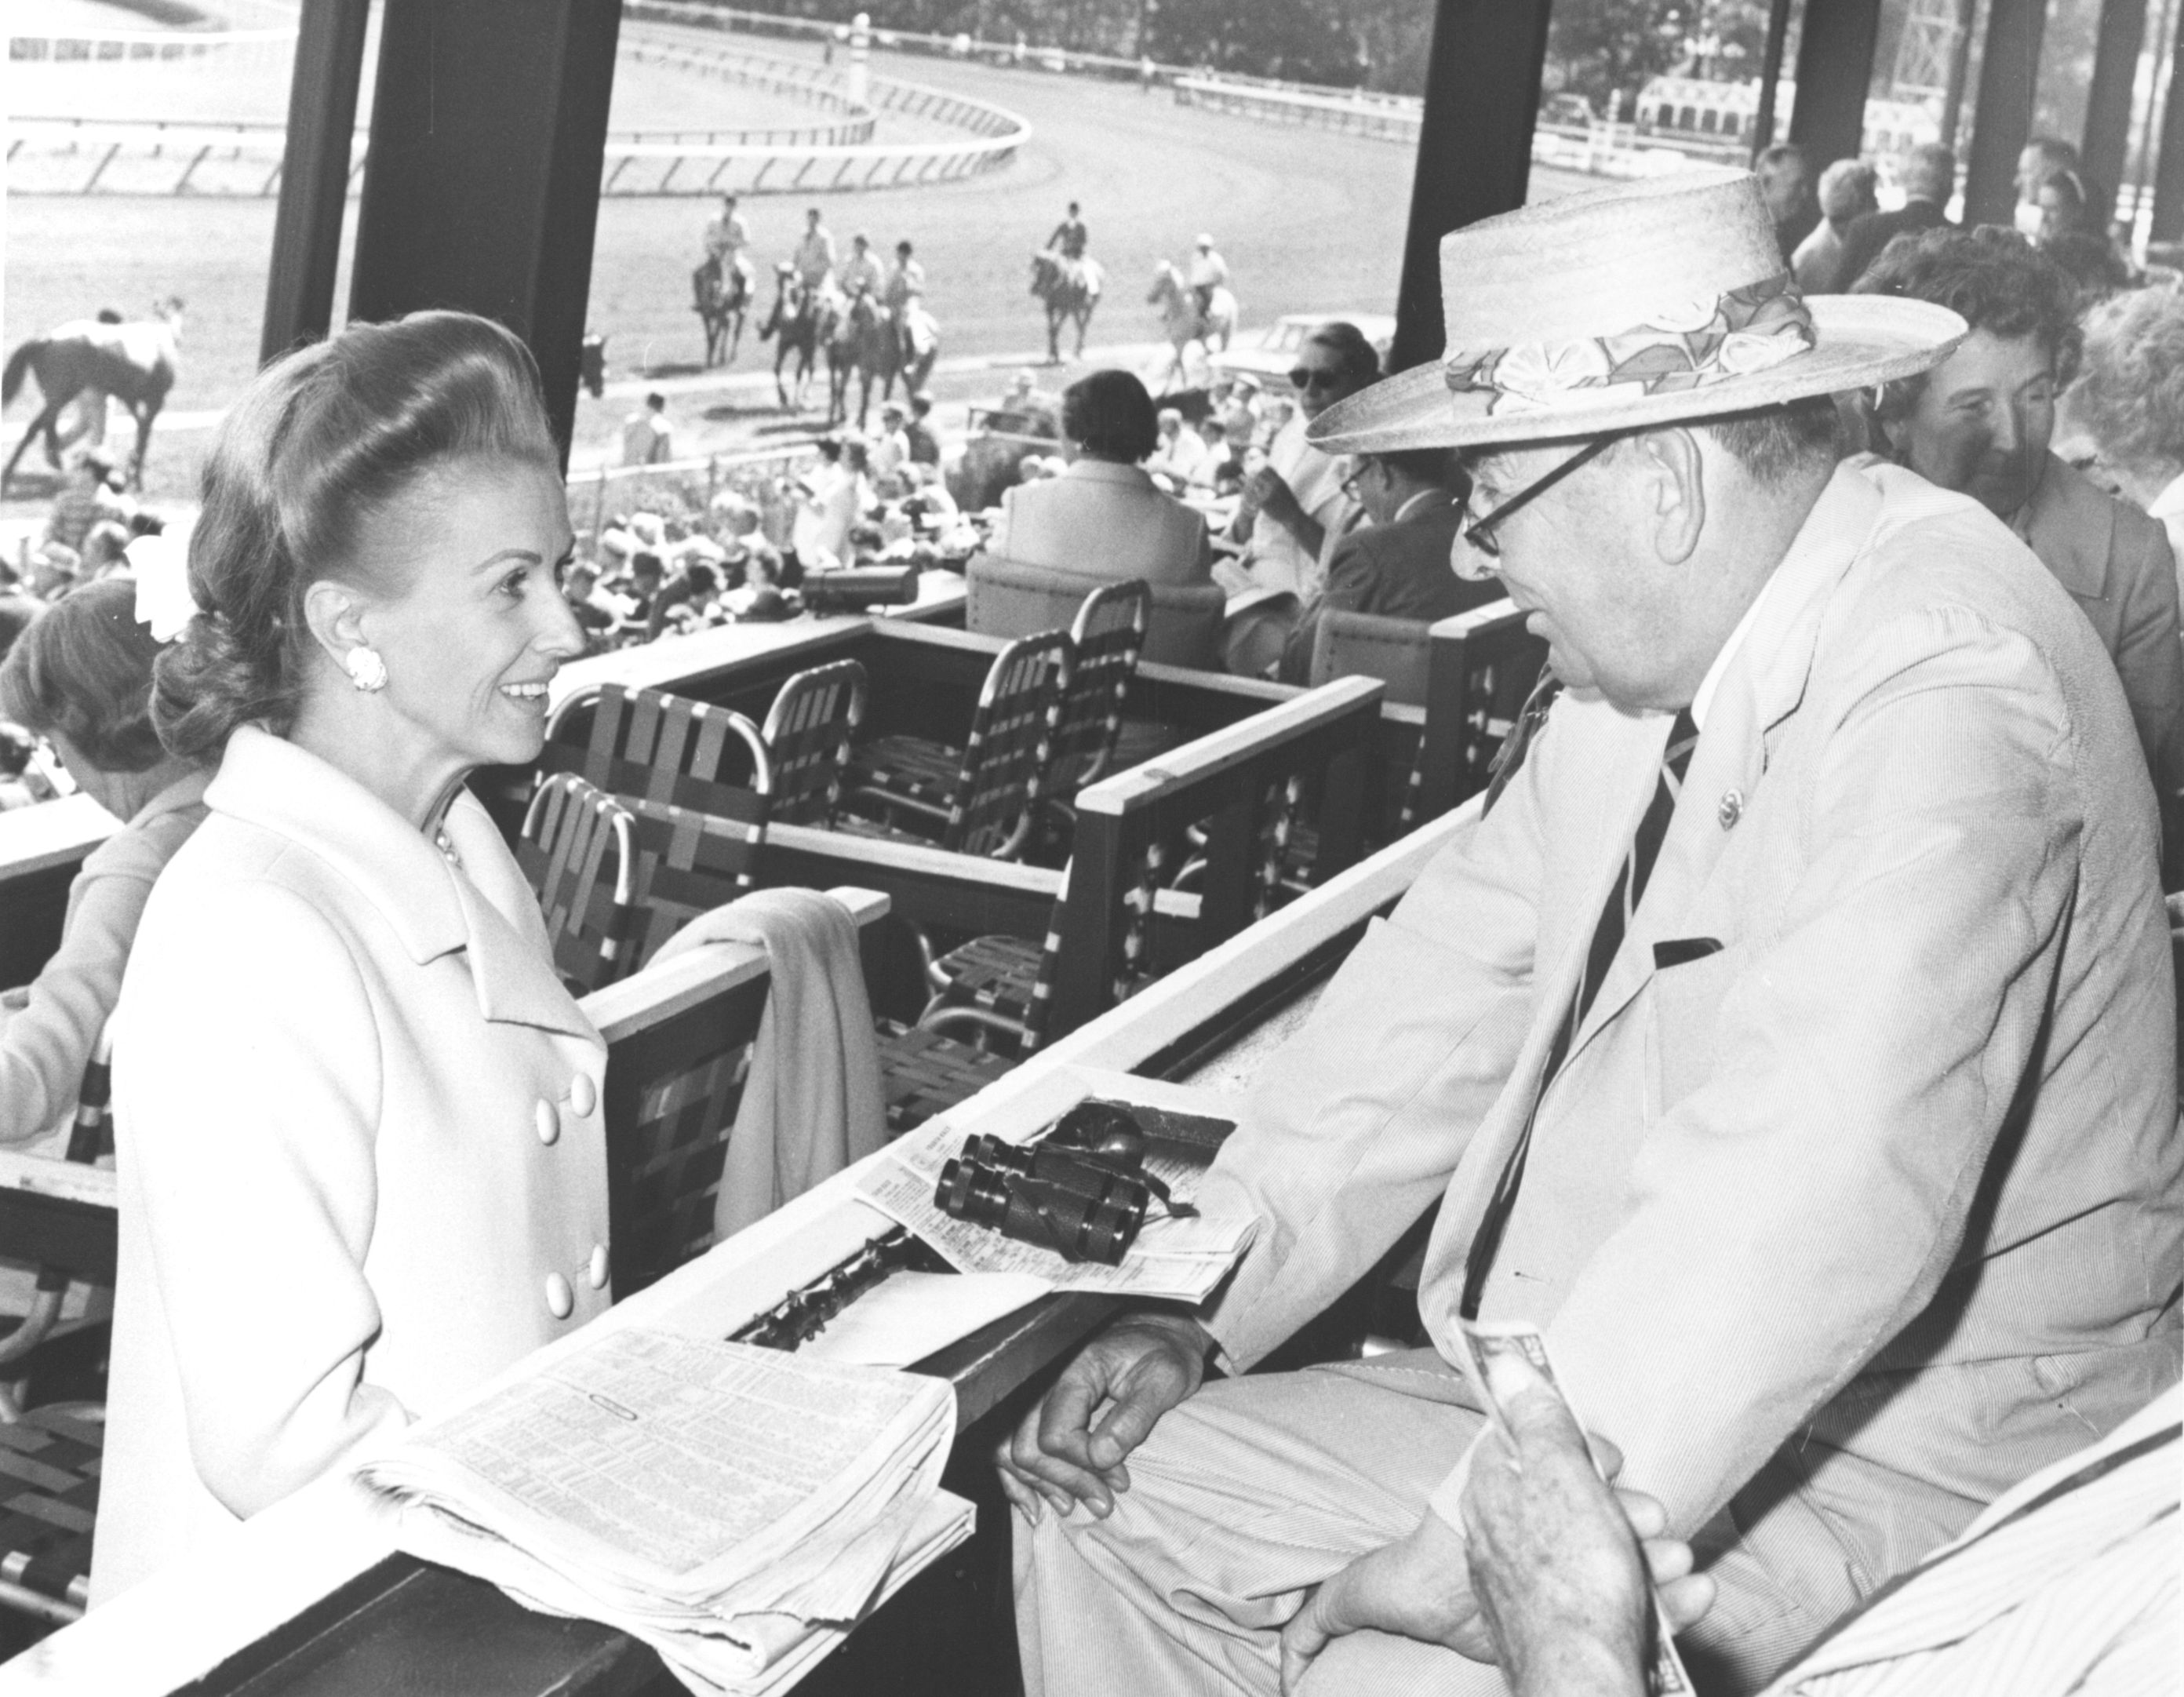 Marylou Whitney and Joseph Roebling at Saratoga (Keeneland Library Morgan Collection)